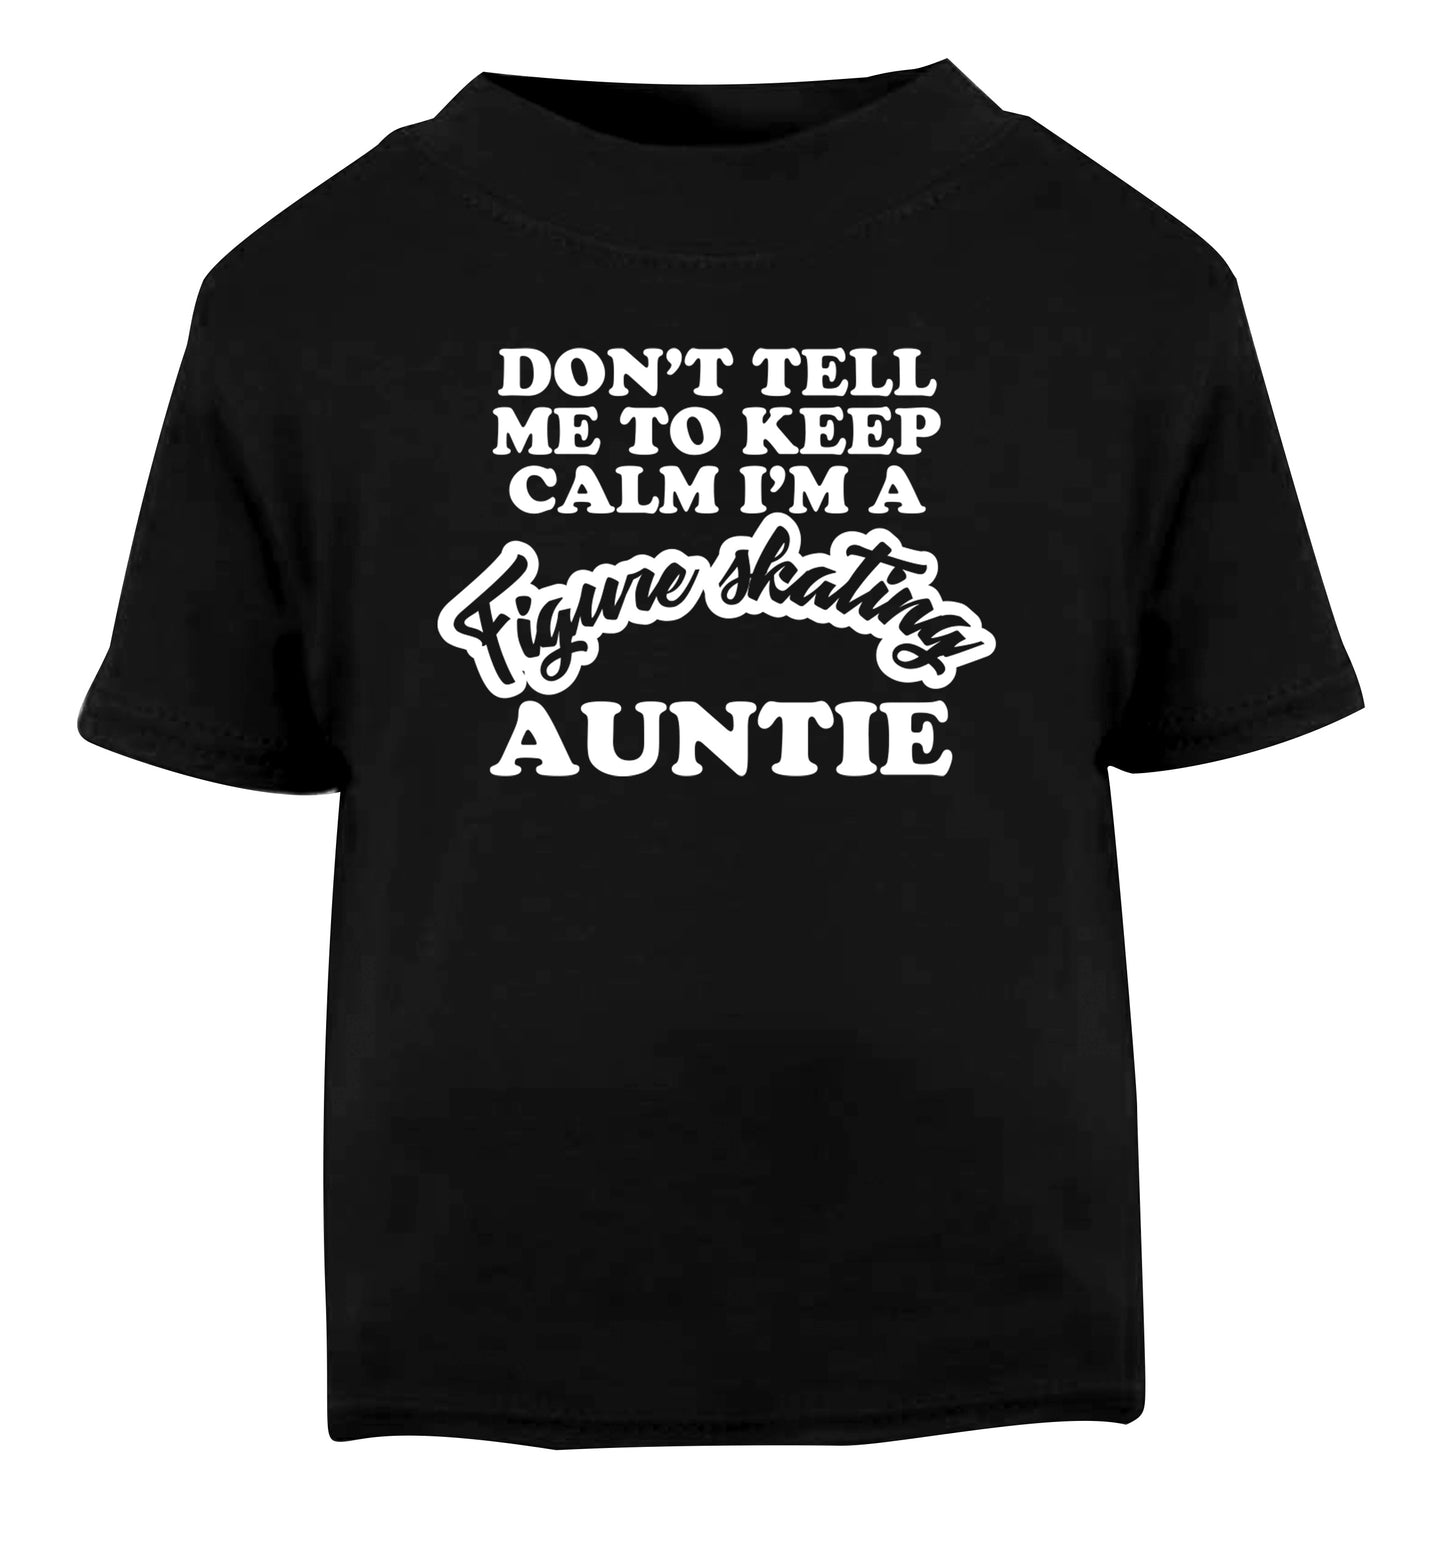 Don't tell me to keep calm I'm a figure skating auntie Black Baby Toddler Tshirt 2 years